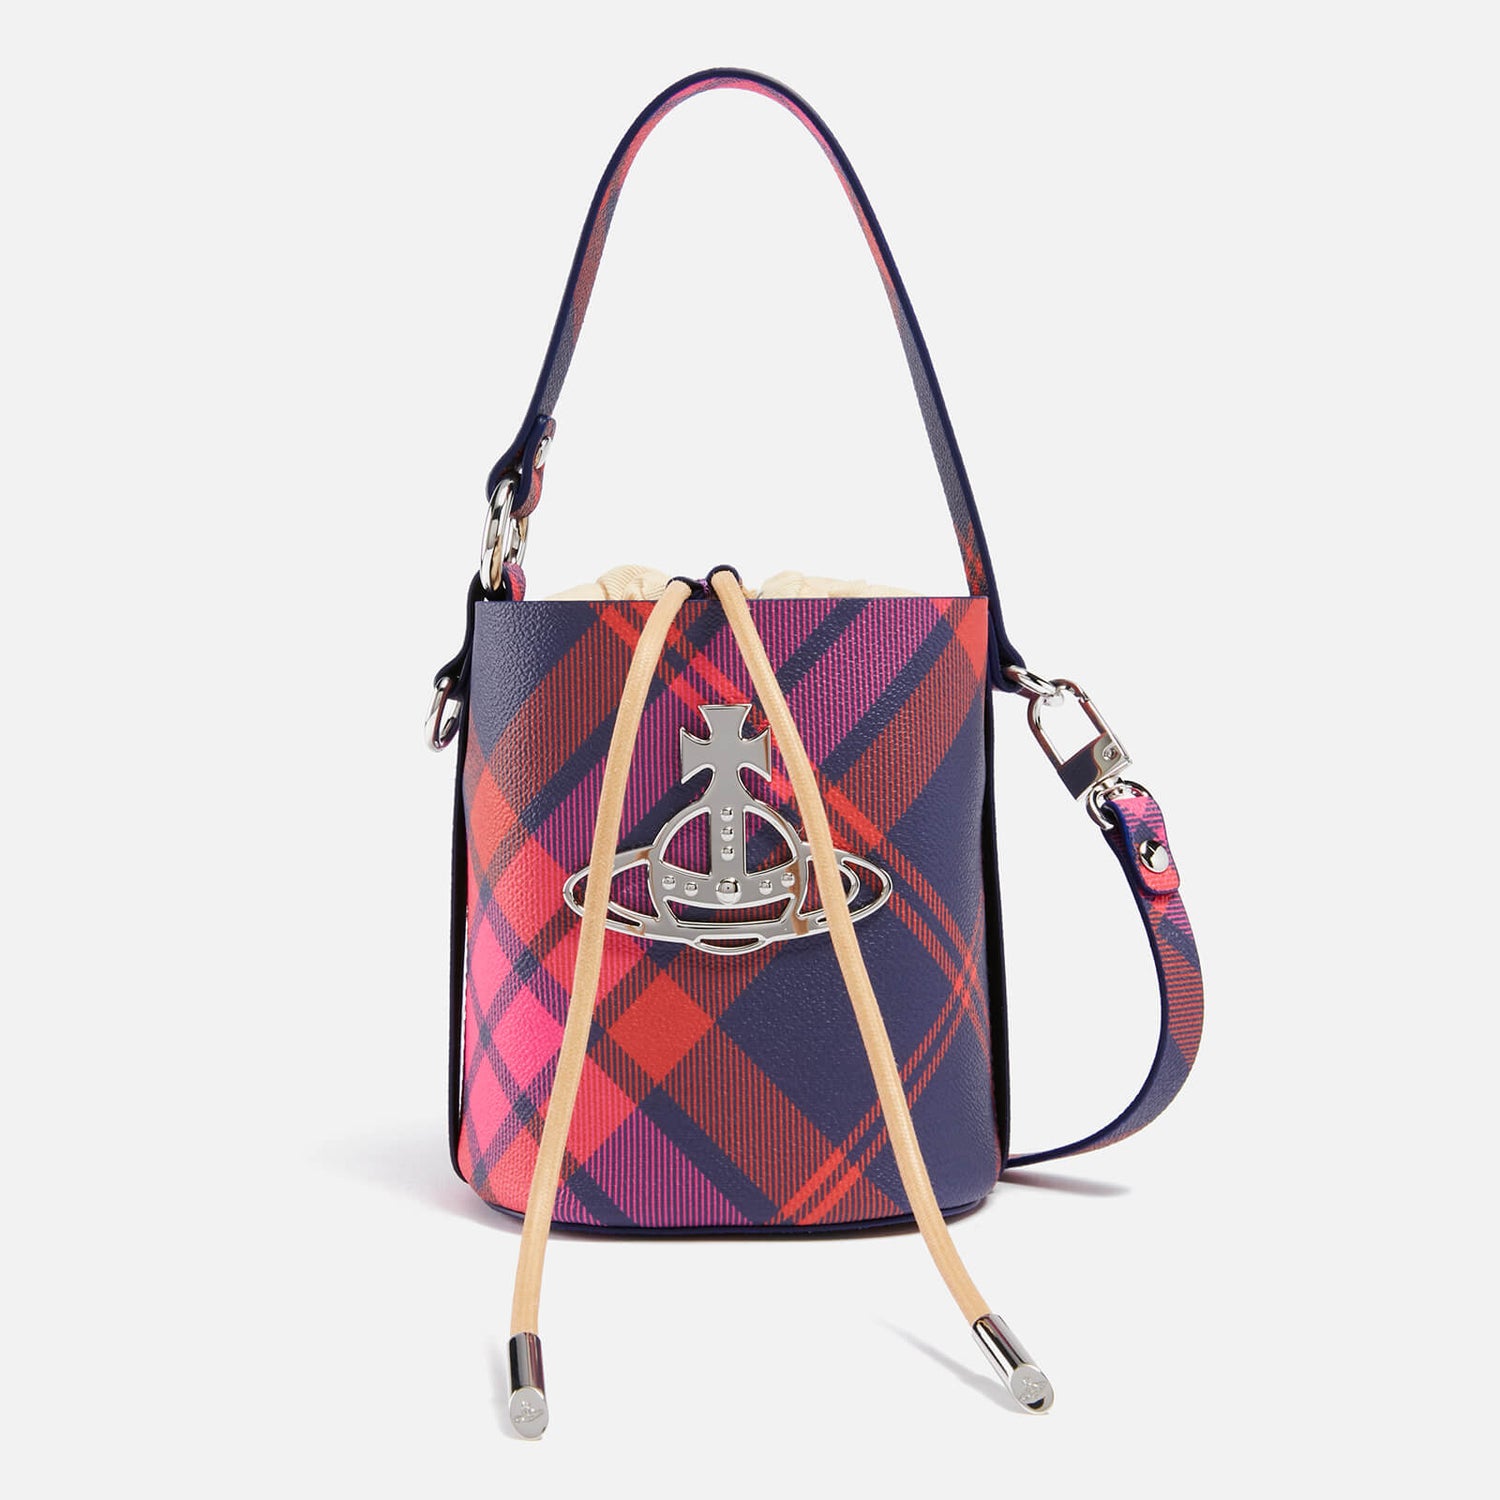 Vivienne Westwood Exclusive Daisy Printed Leather Bucket Bag